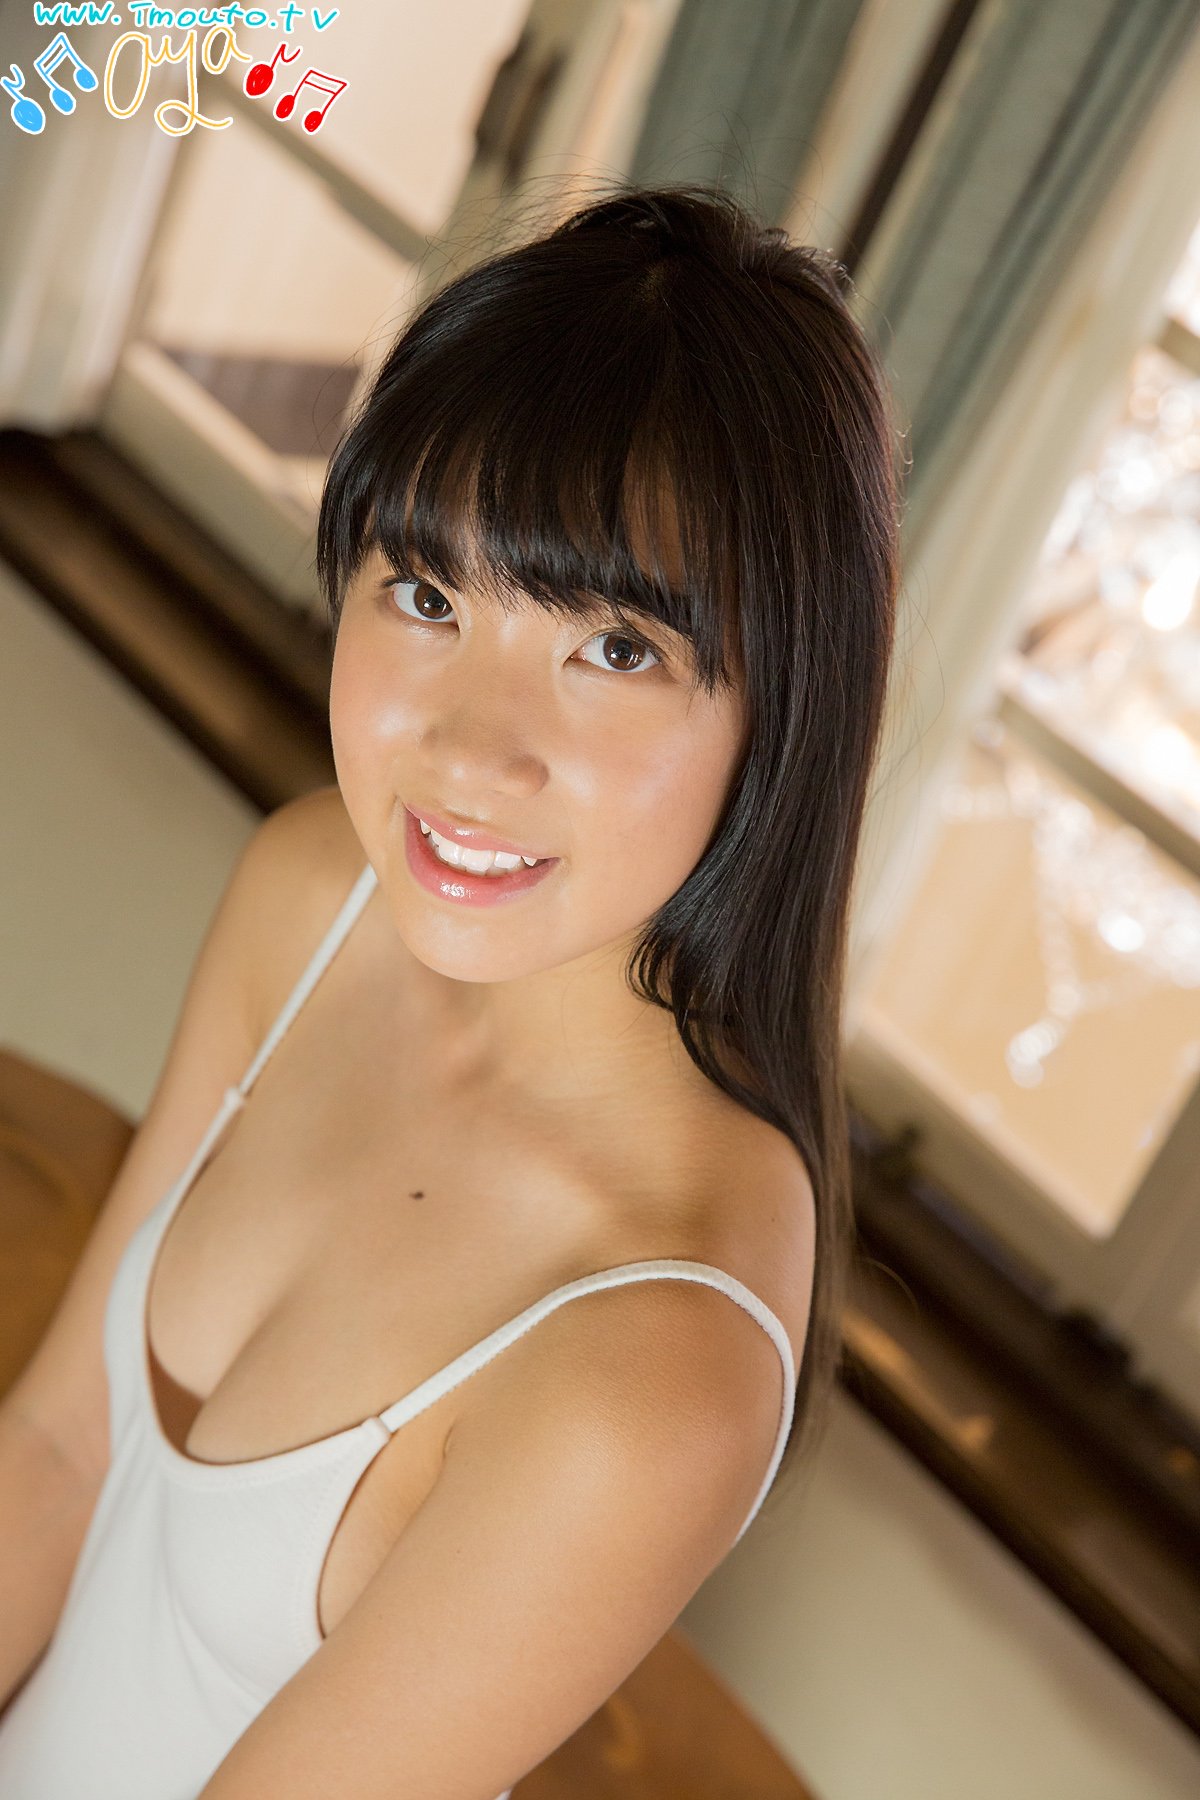 cathy angelo recommends rei kuromiya nude pic